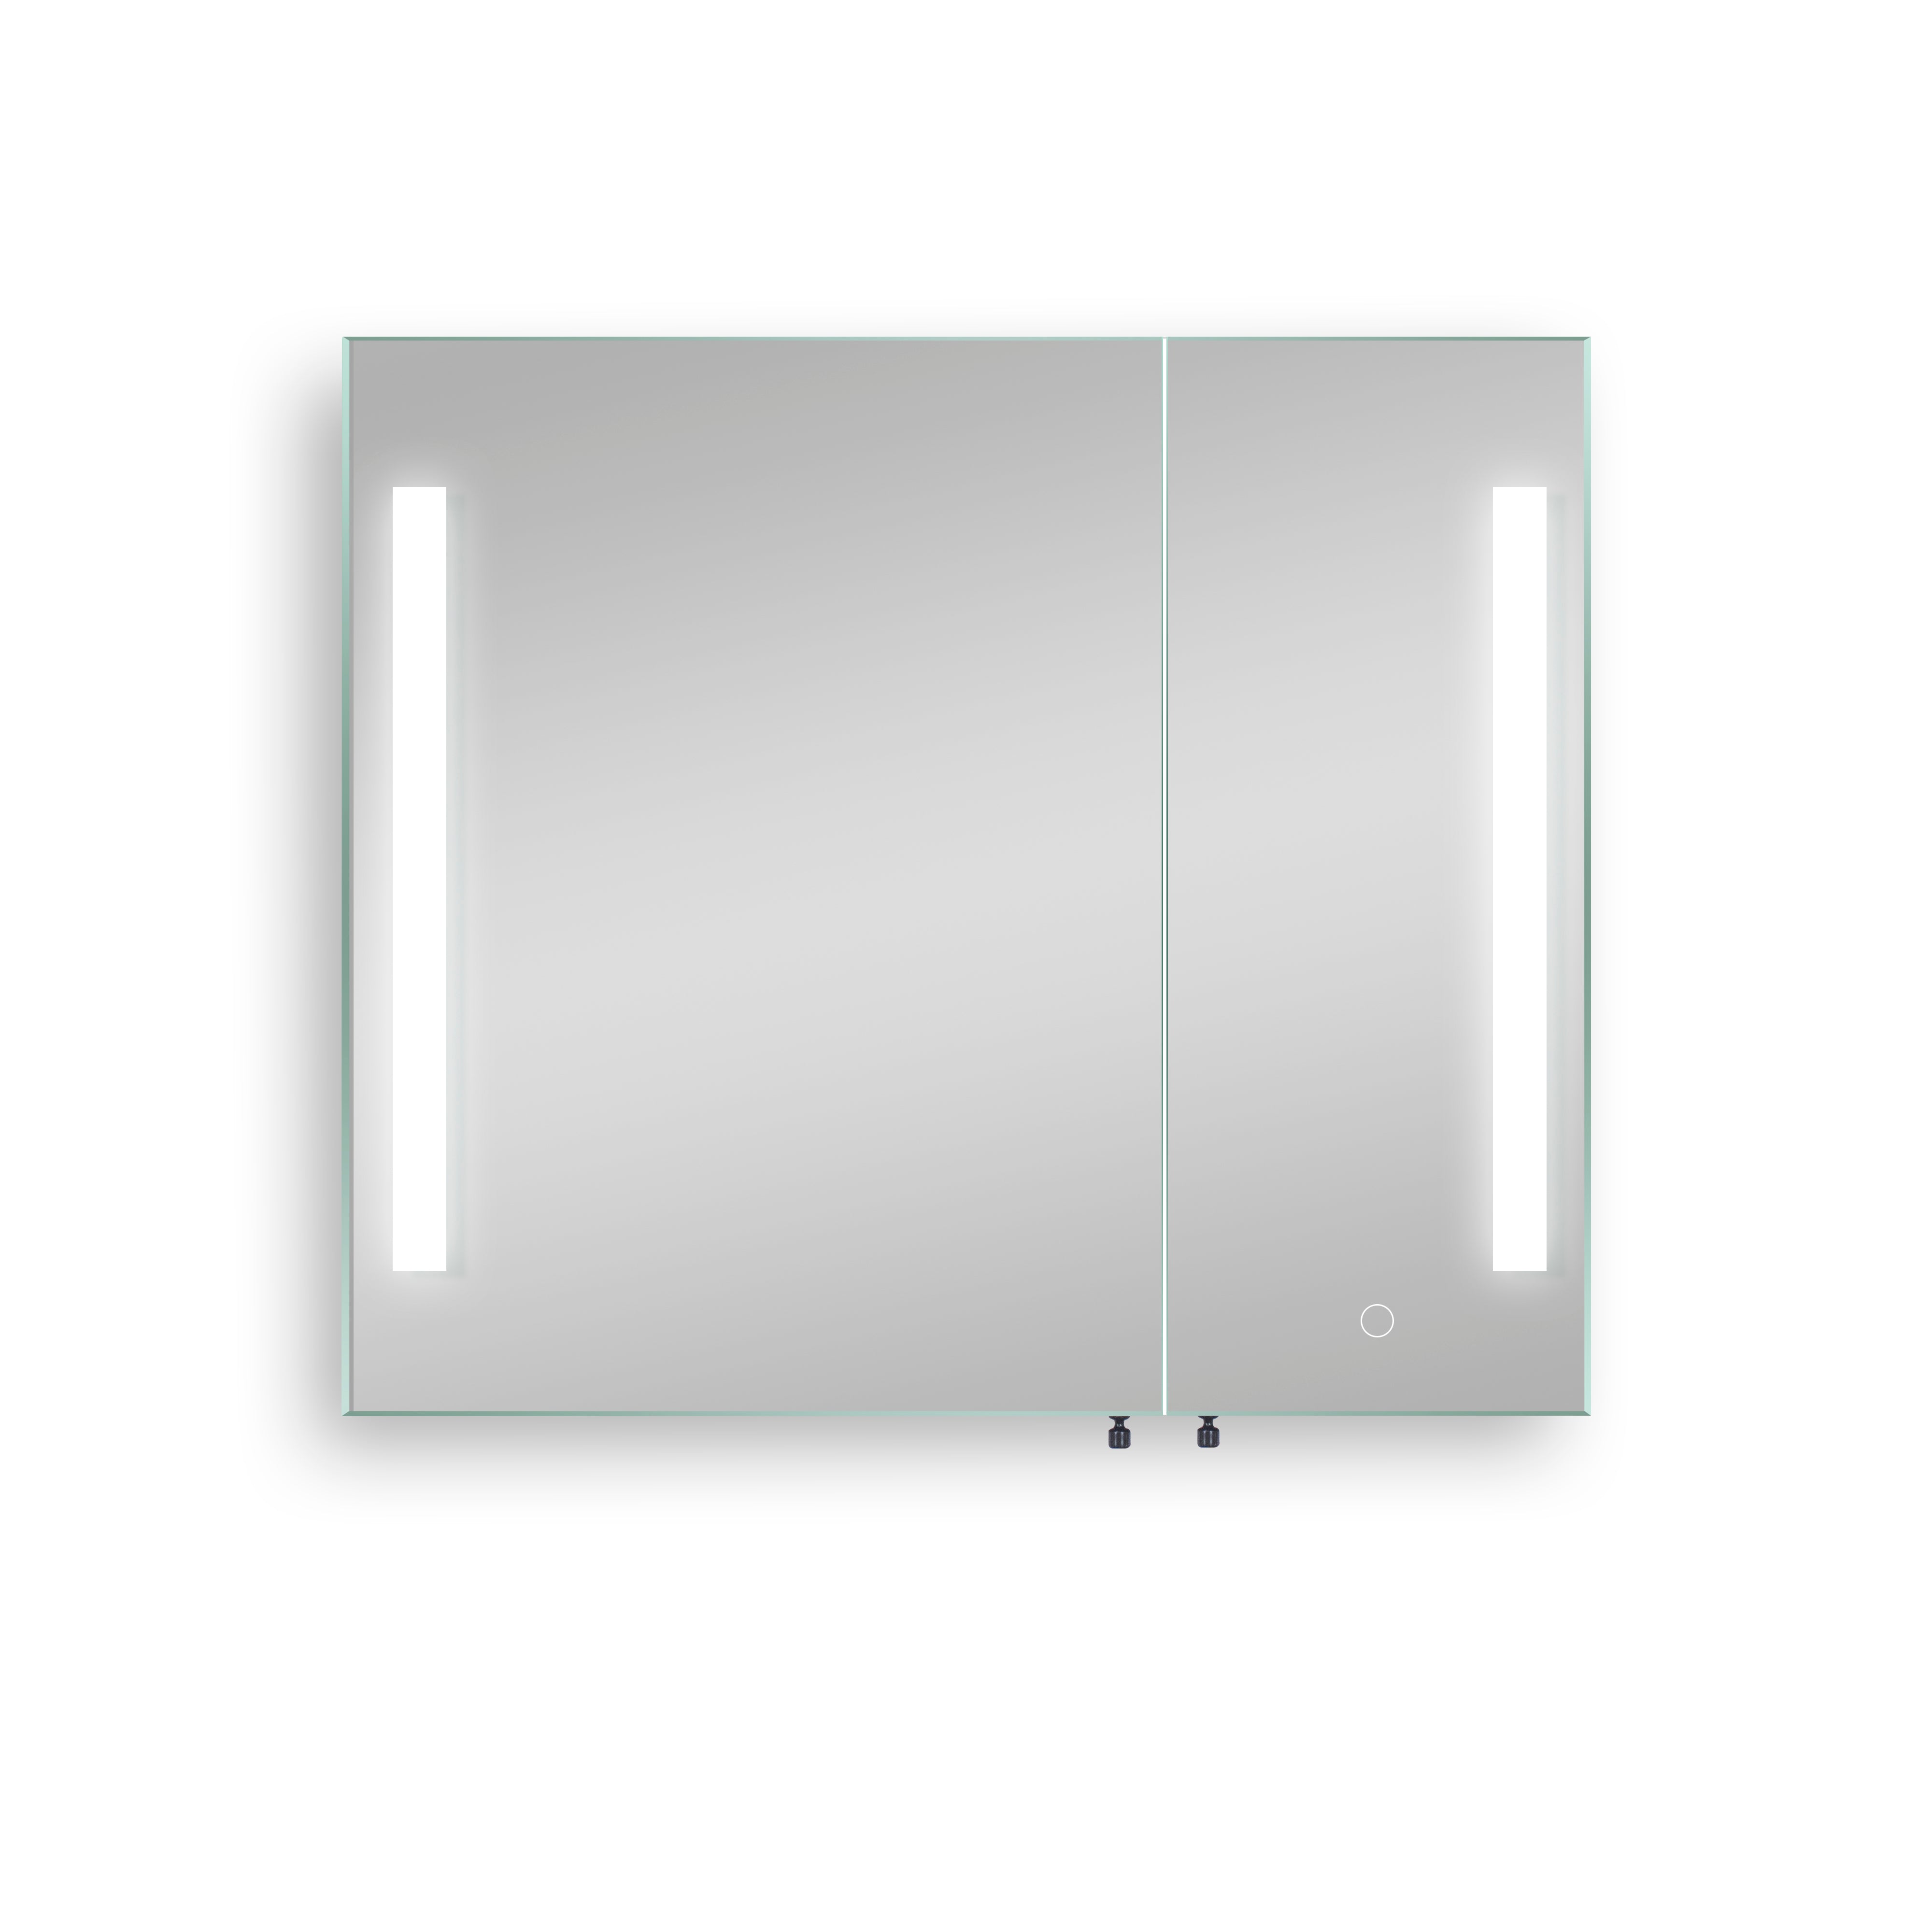 Illuminate Your Bathroom with Our 30 inches x 26 inches LED Medicine Cabinet - High Quality and Easy Installation - Eco LED Lightings 